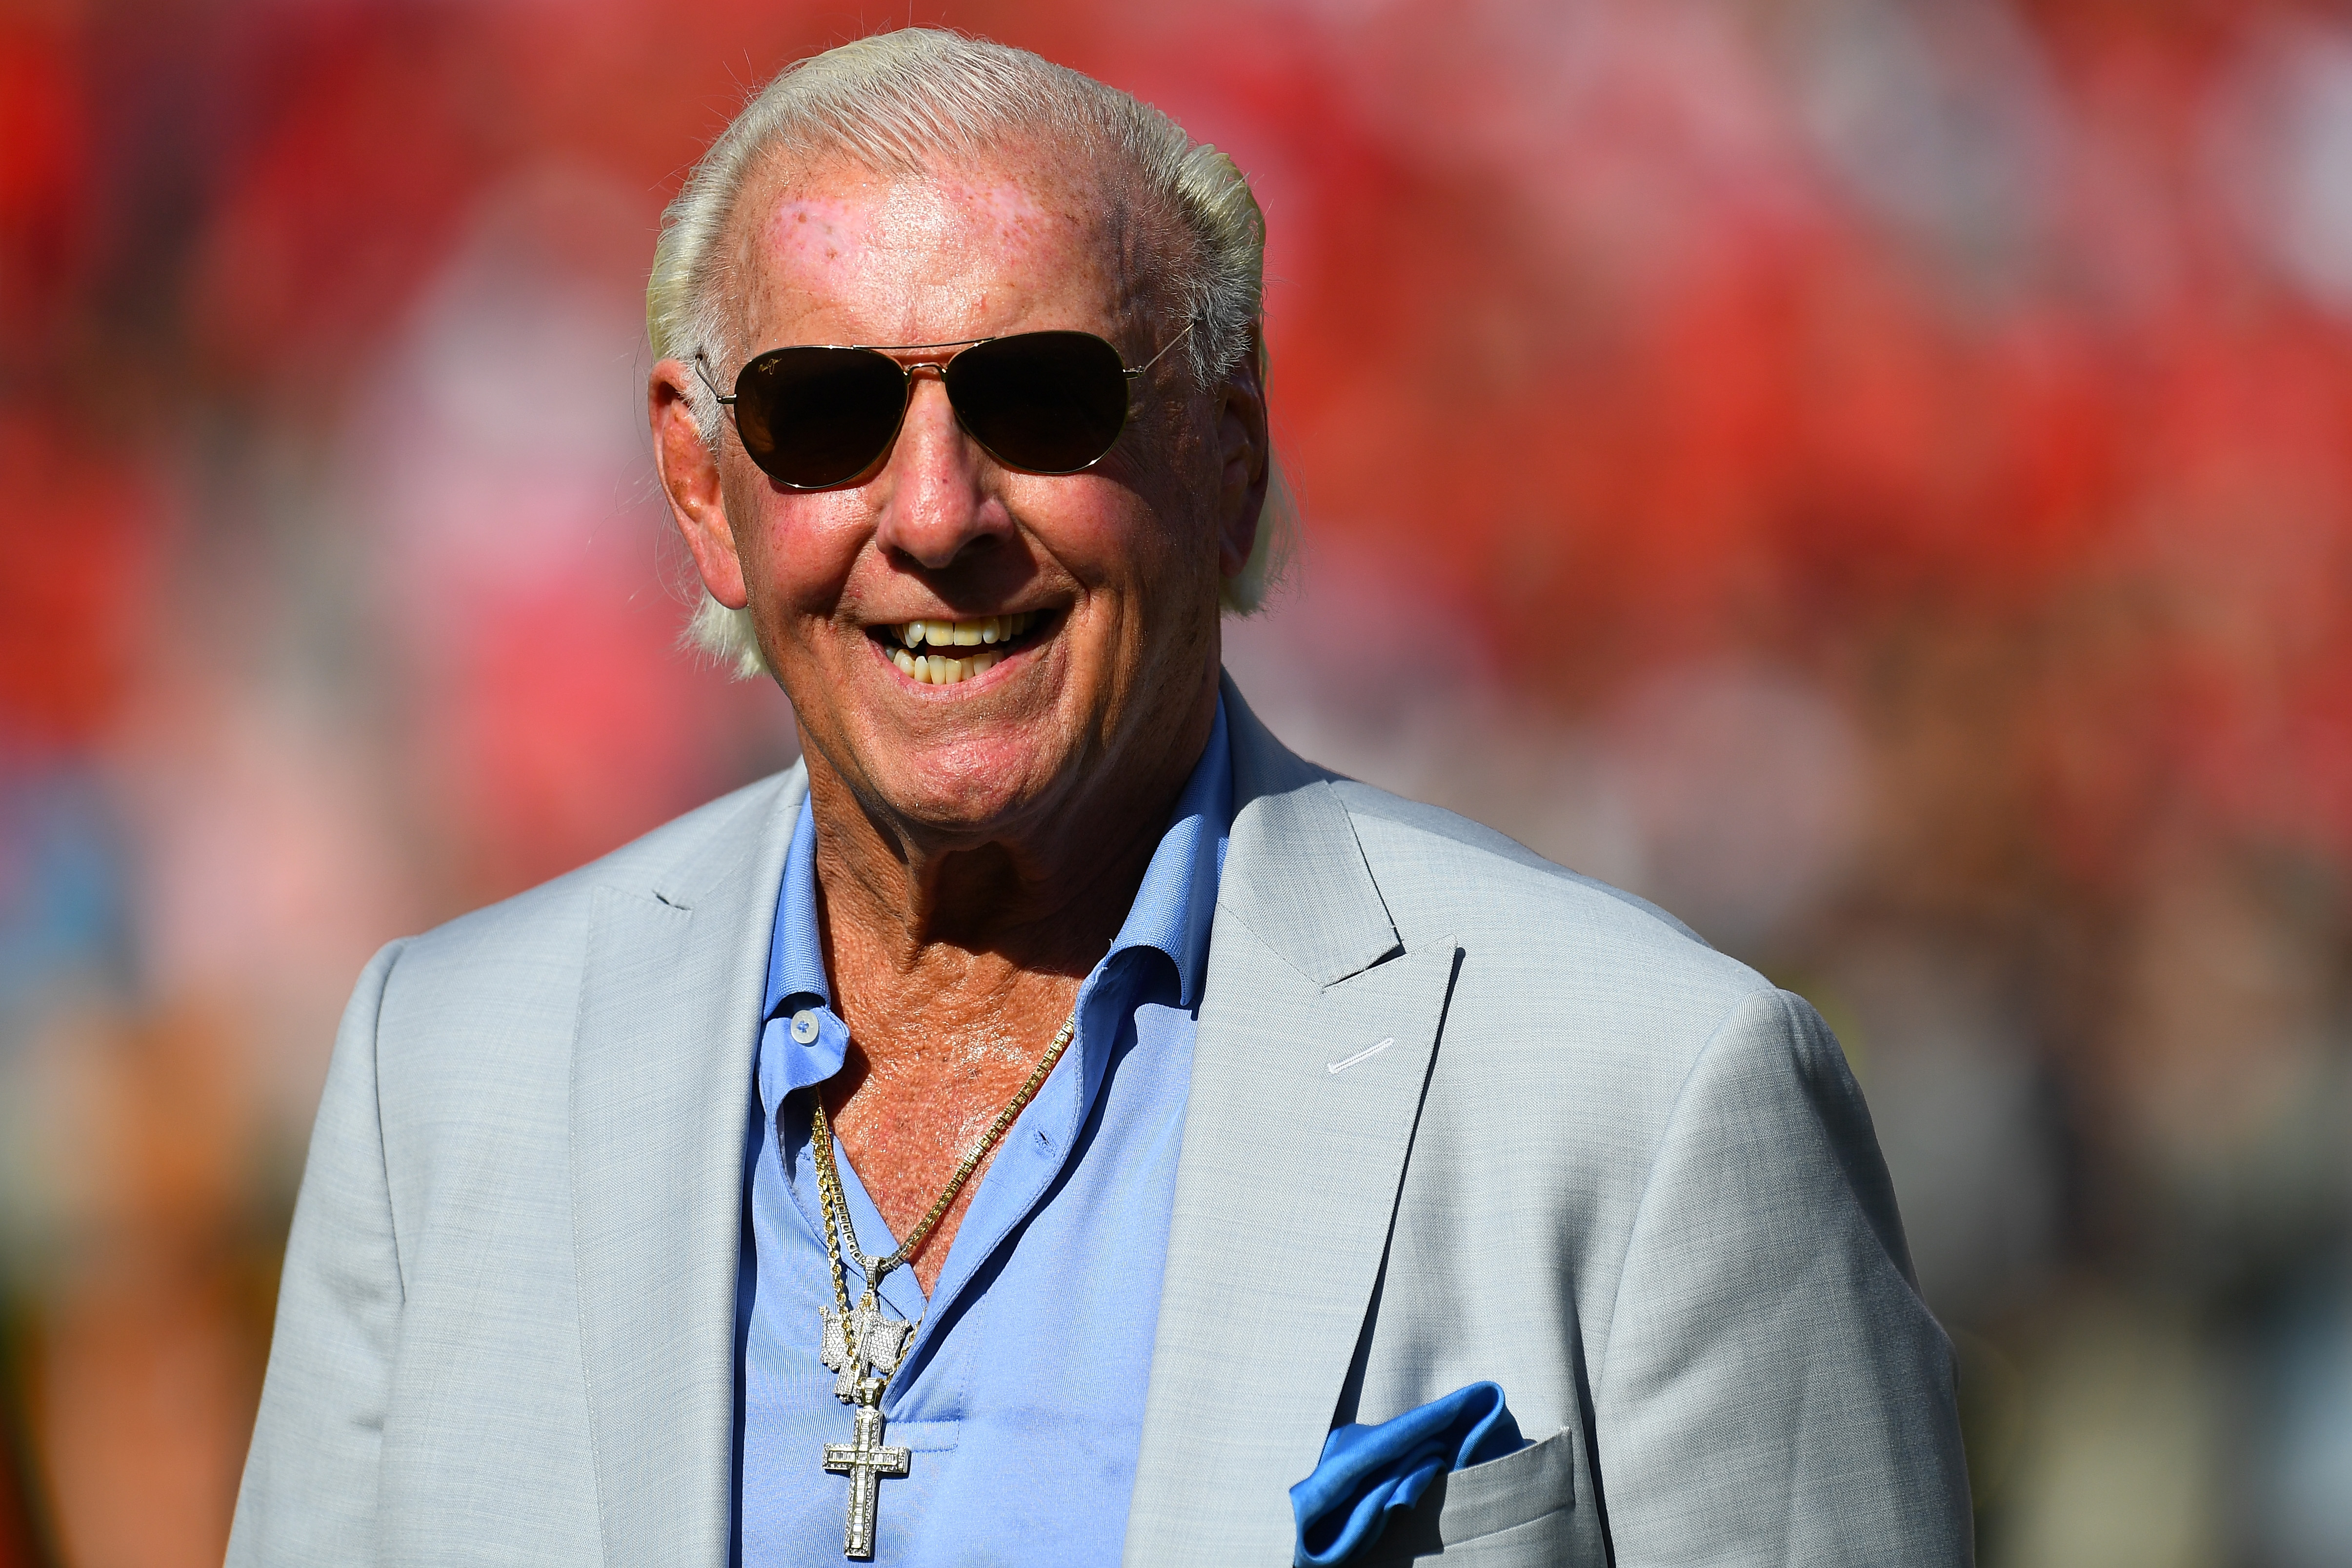 Ric Flair Says Recent Surgery Added Years To His Life: “I Could Live To Be 95”